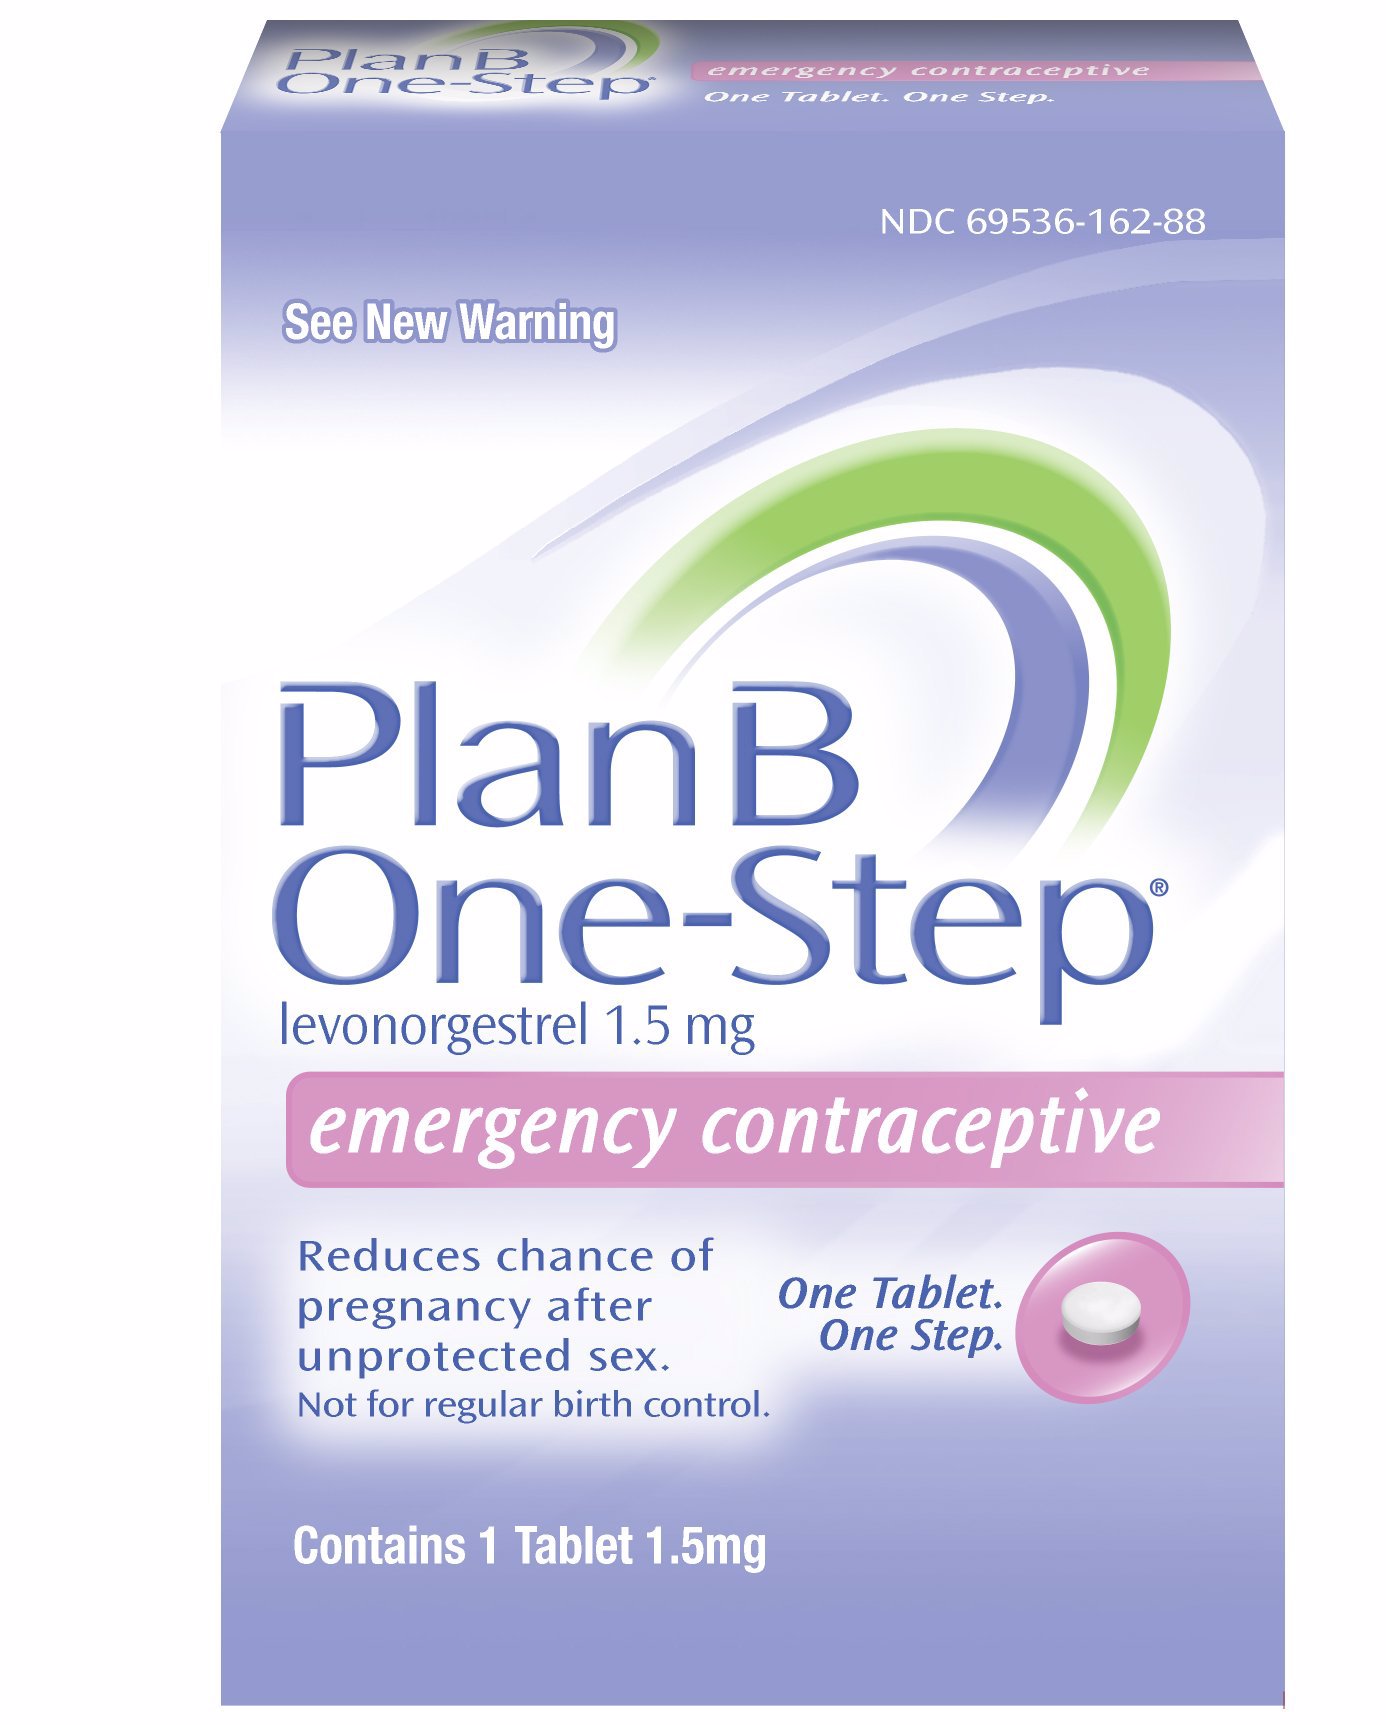 Box labeled Plan B emergency contraceptive